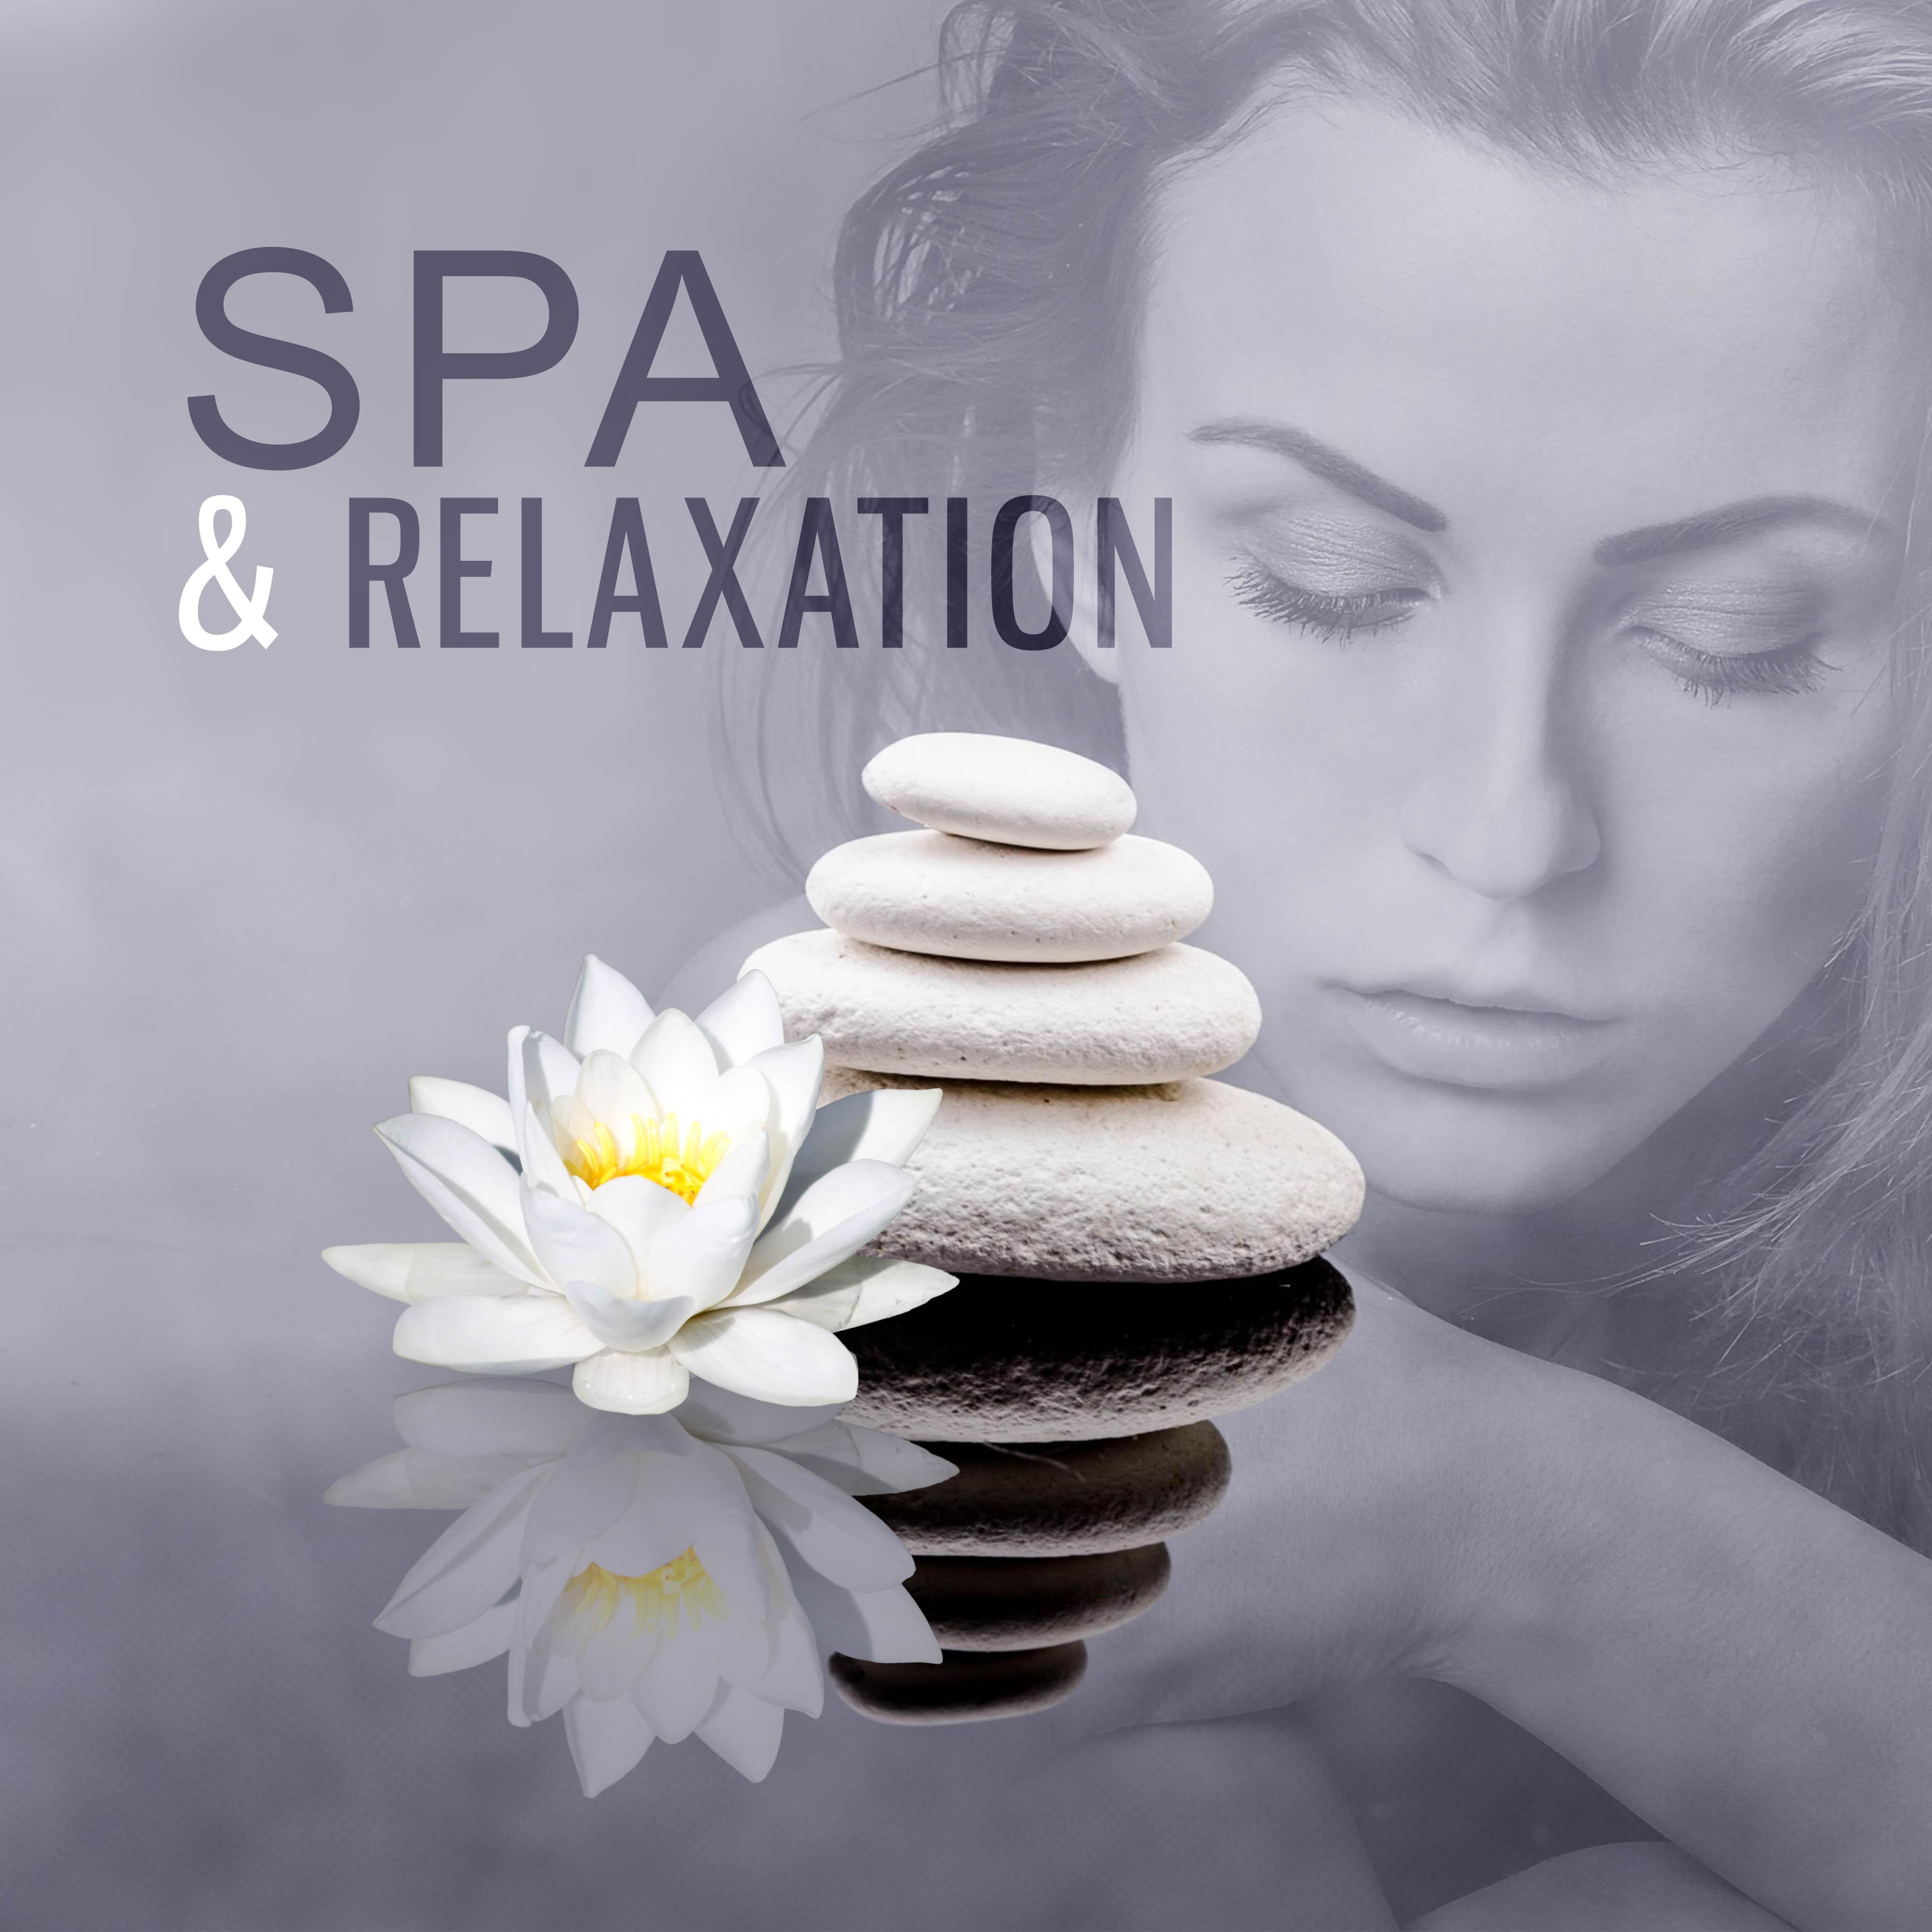 Spa  Relaxation  Healing Spa Sounds